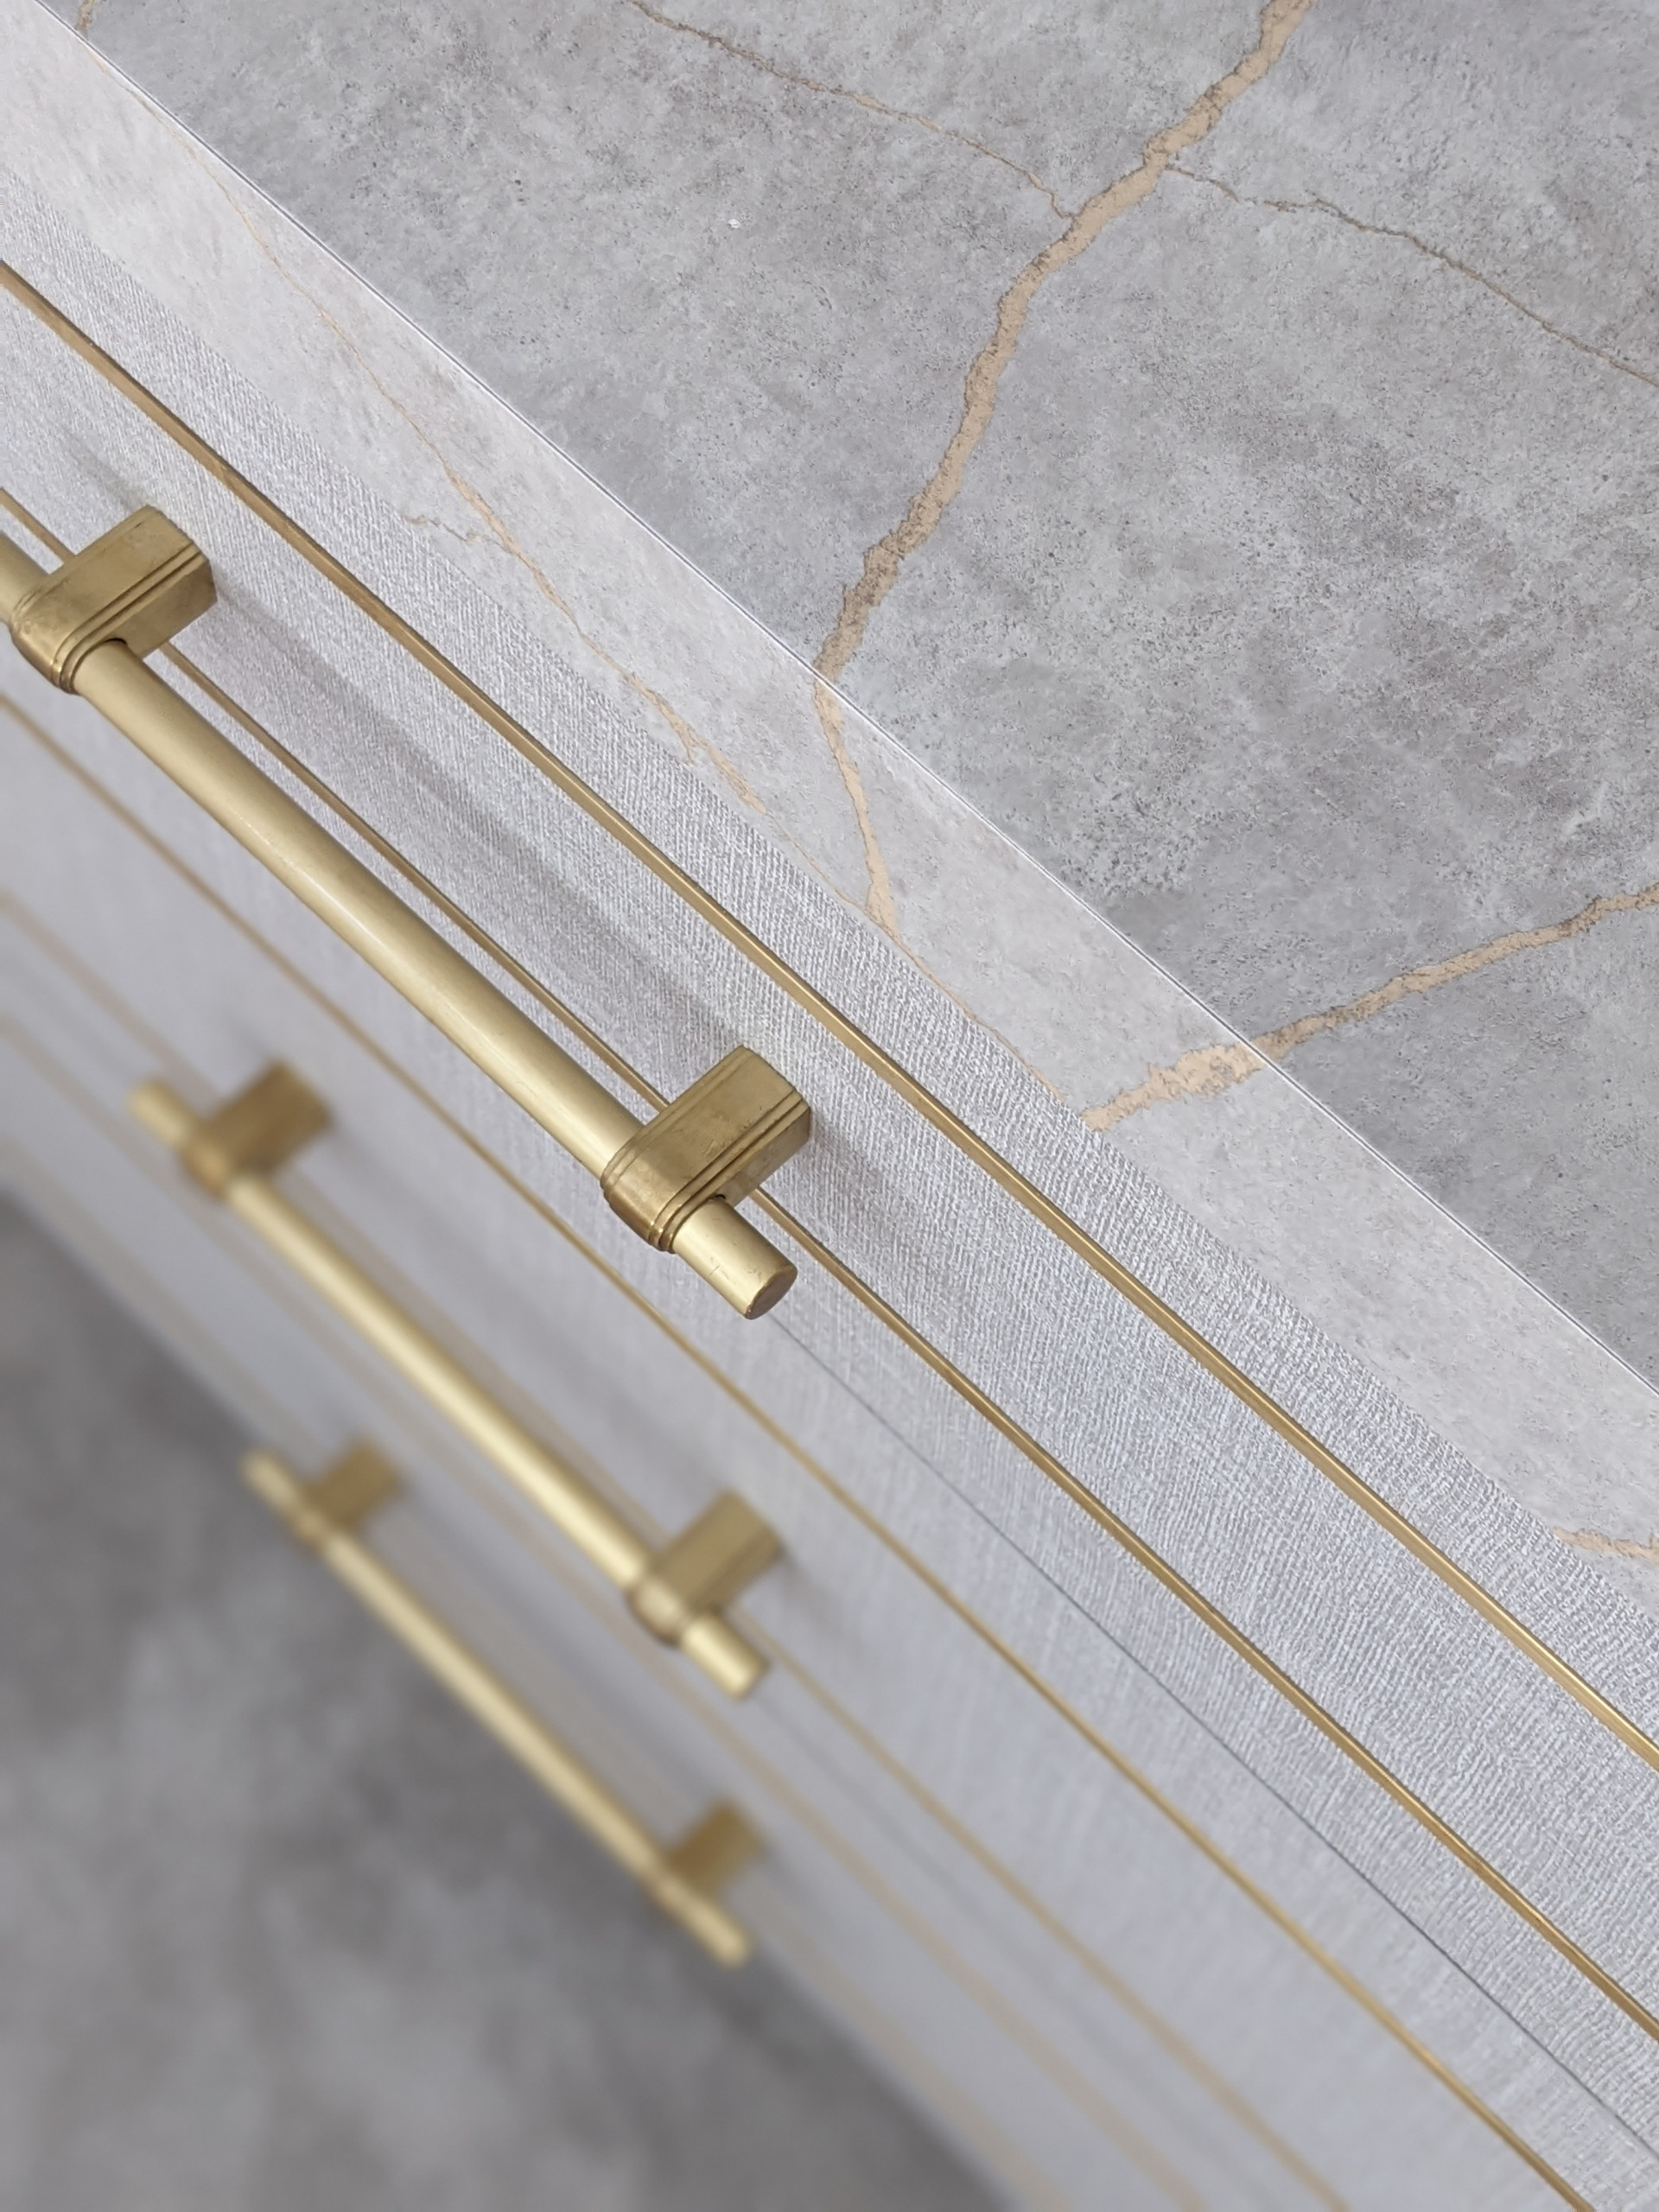 Joinery details: marble top, brass inlays and handles